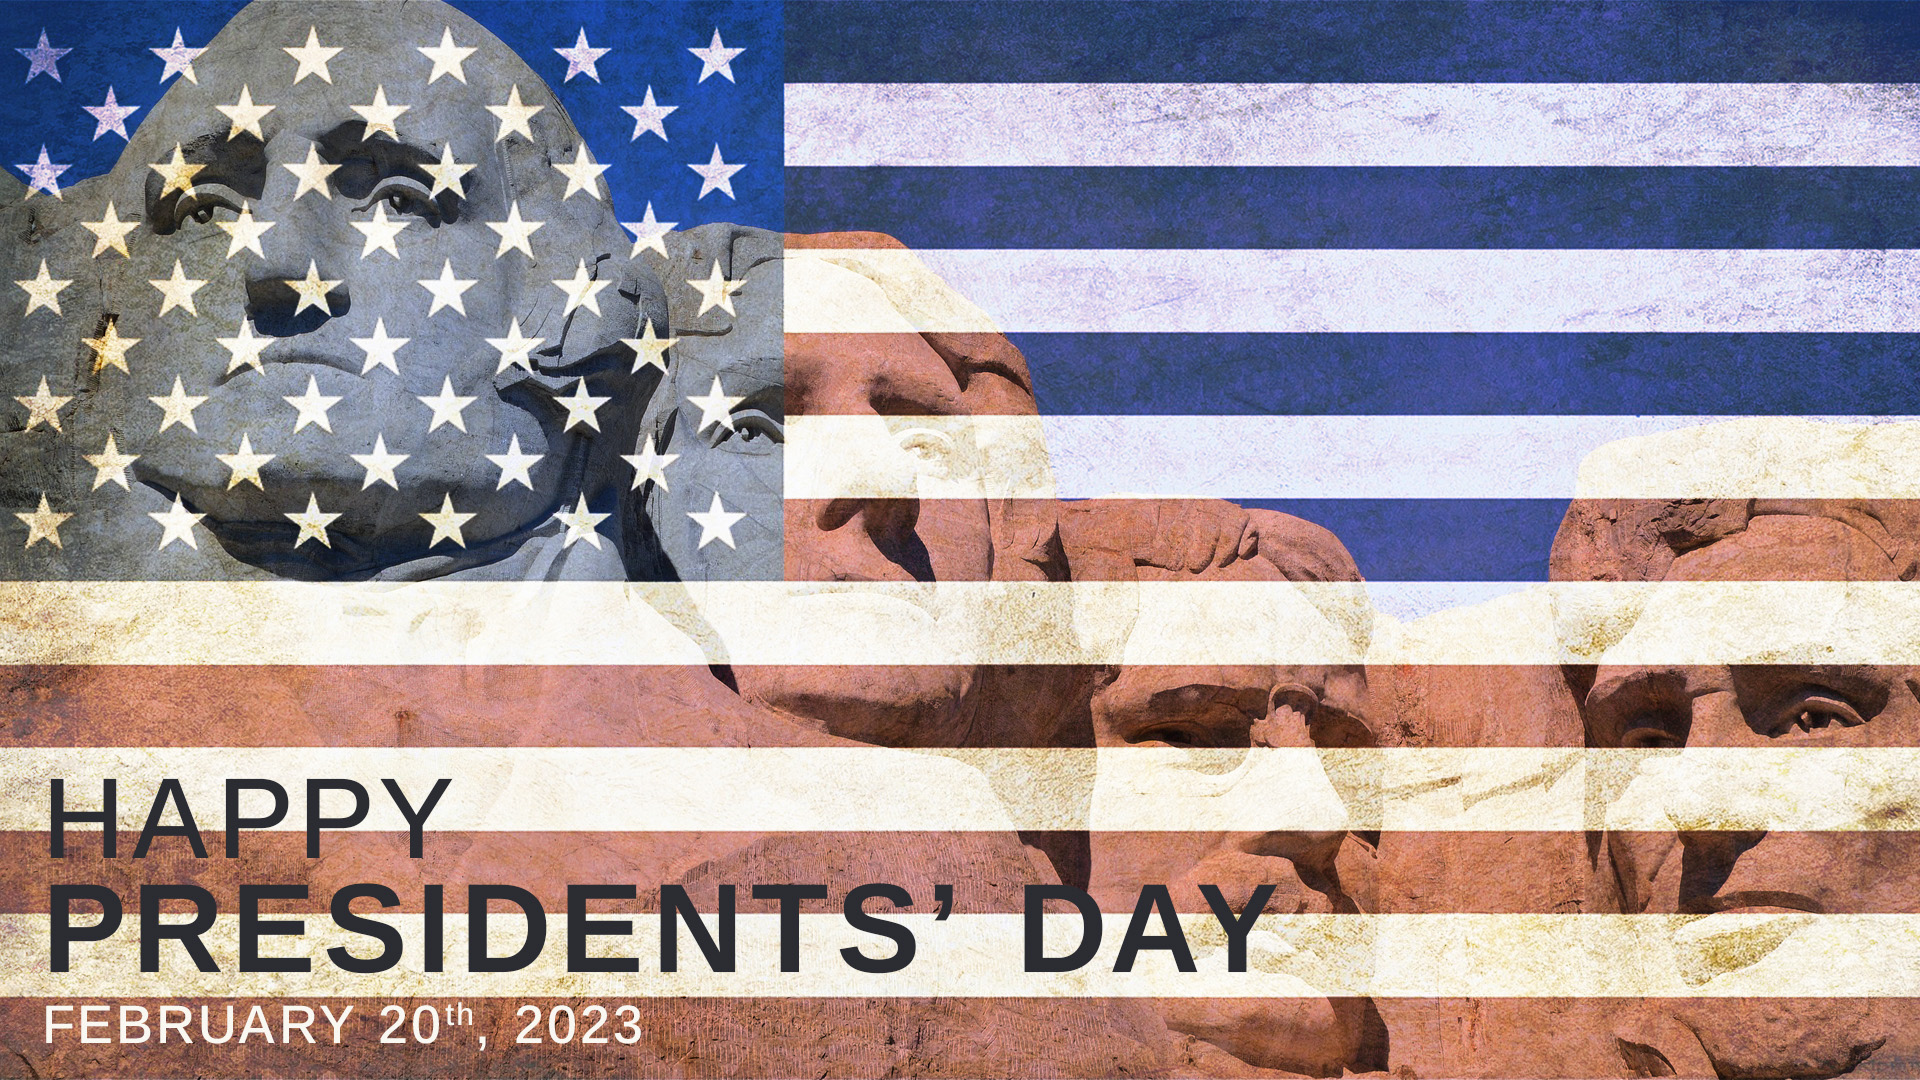 Mount Rushmore heads in the background with a overlay of the american flag across the whole graphic. "Happy Presidents' Day February 20th, 2023" is written across the bottom left corner of the graphic.